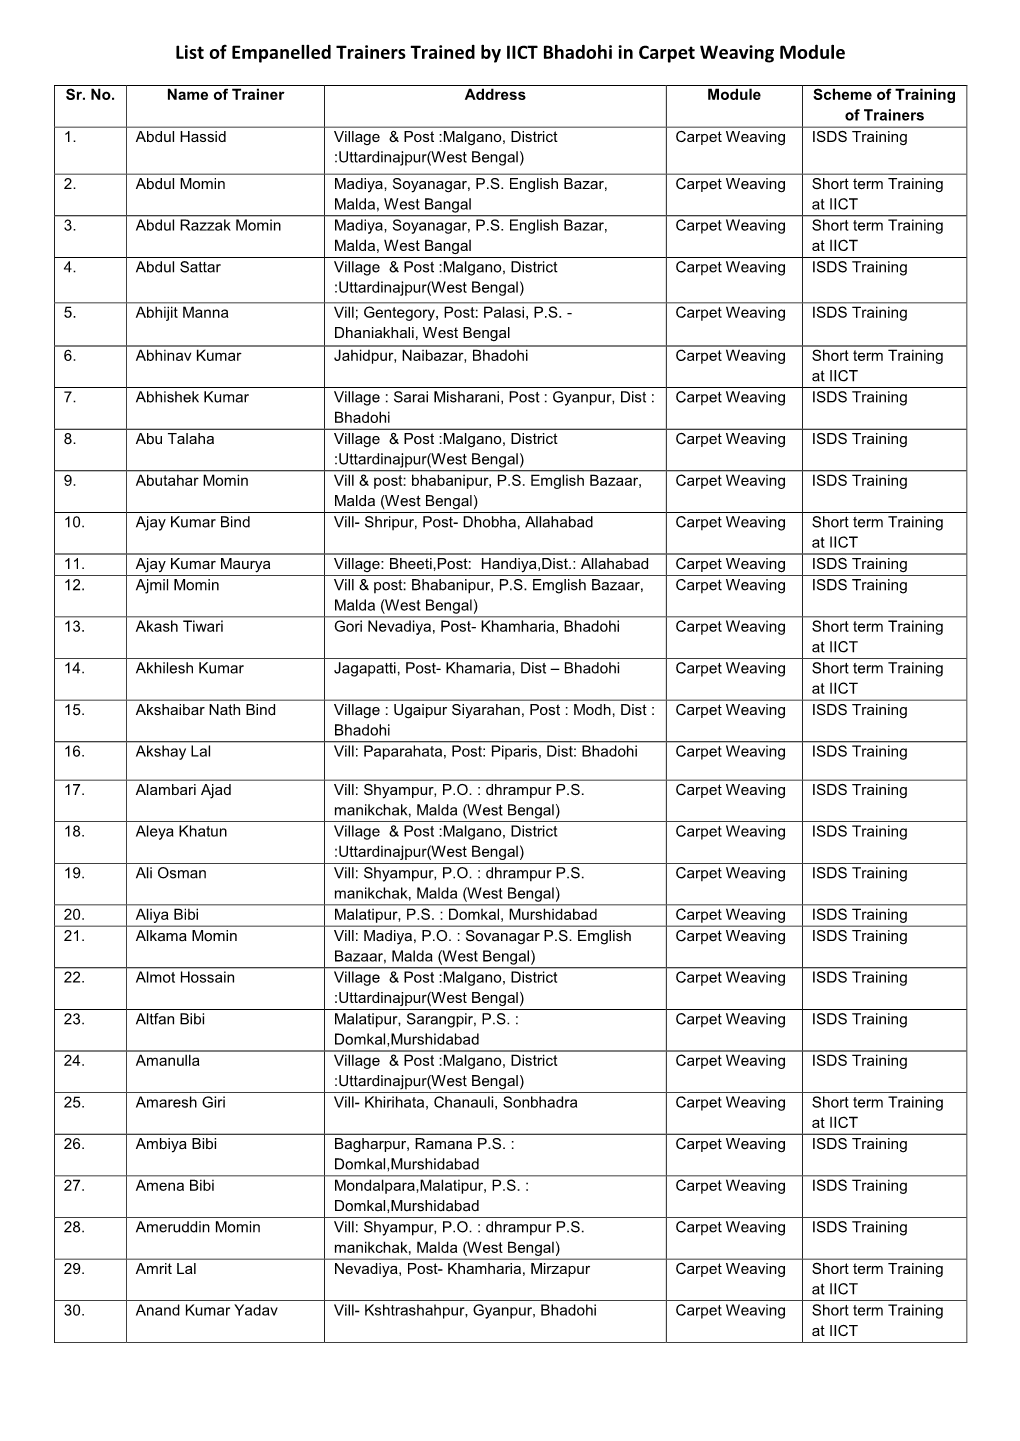 List of Empanelled Trainers Trained by IICT Bhadohi in Carpet Weaving Module